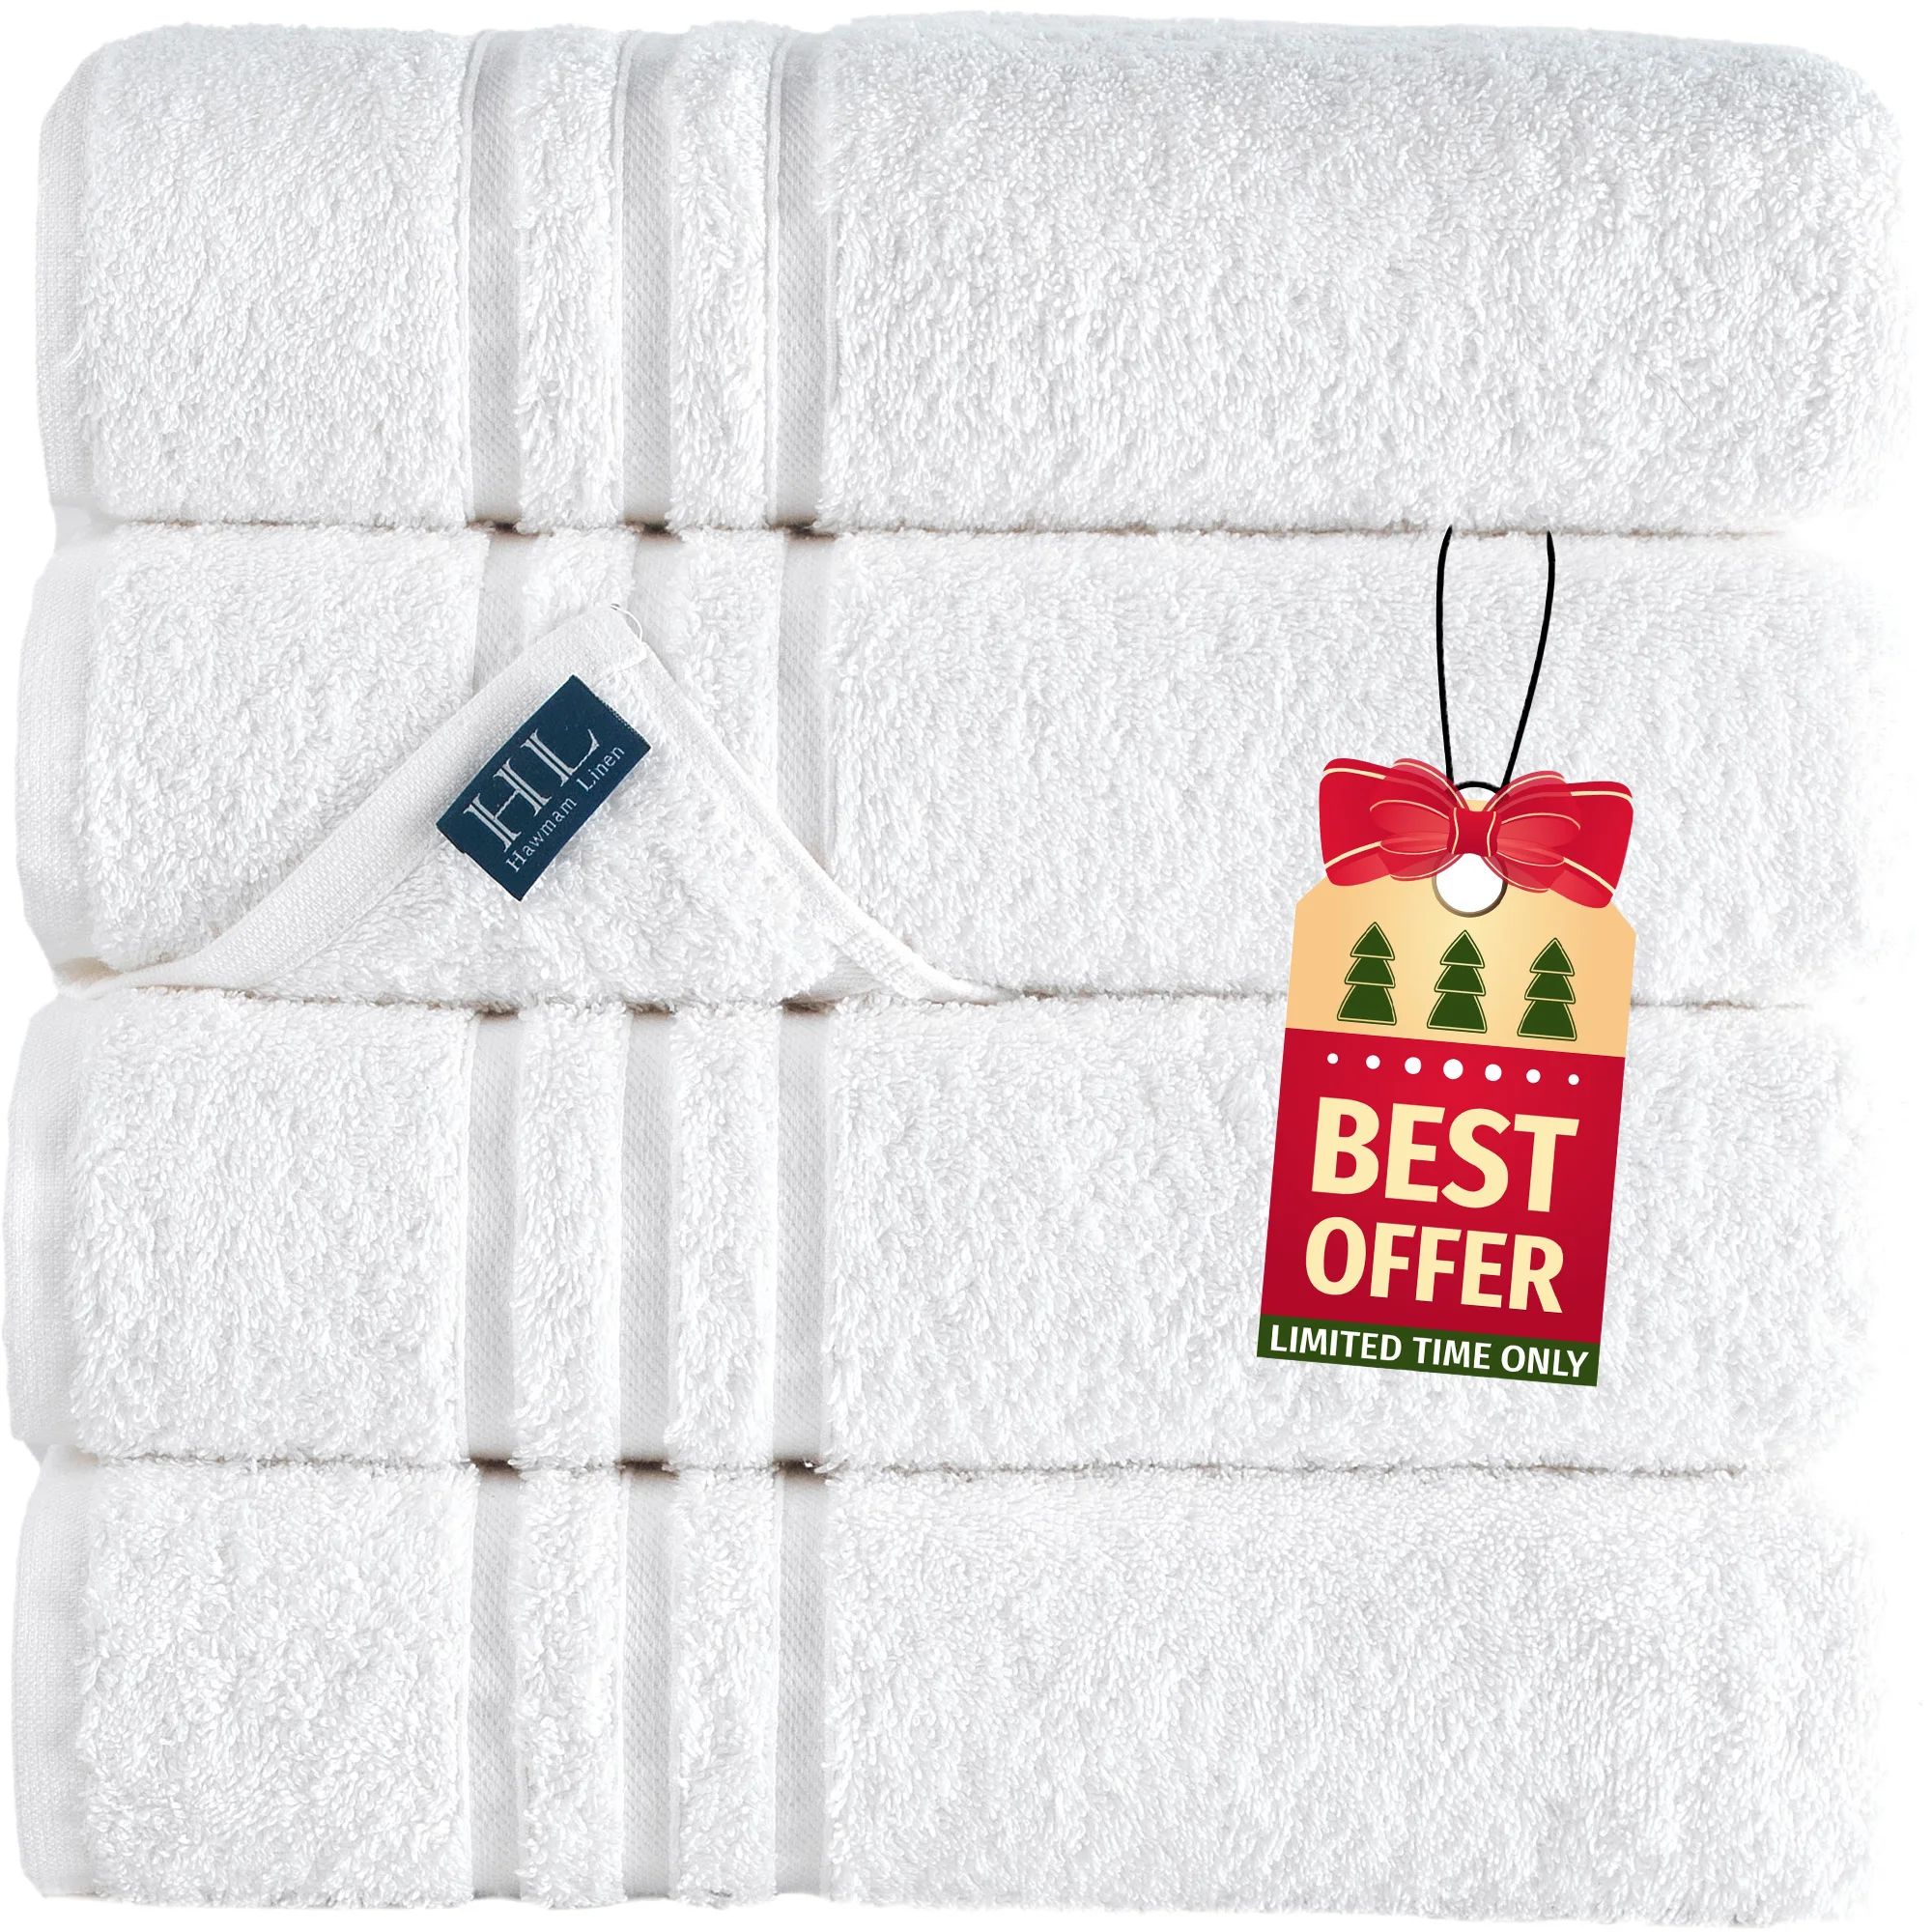 Hammam Linen 4 Piece Bath Towels Set - White - Perfect for Daily Use | Walmart (US)